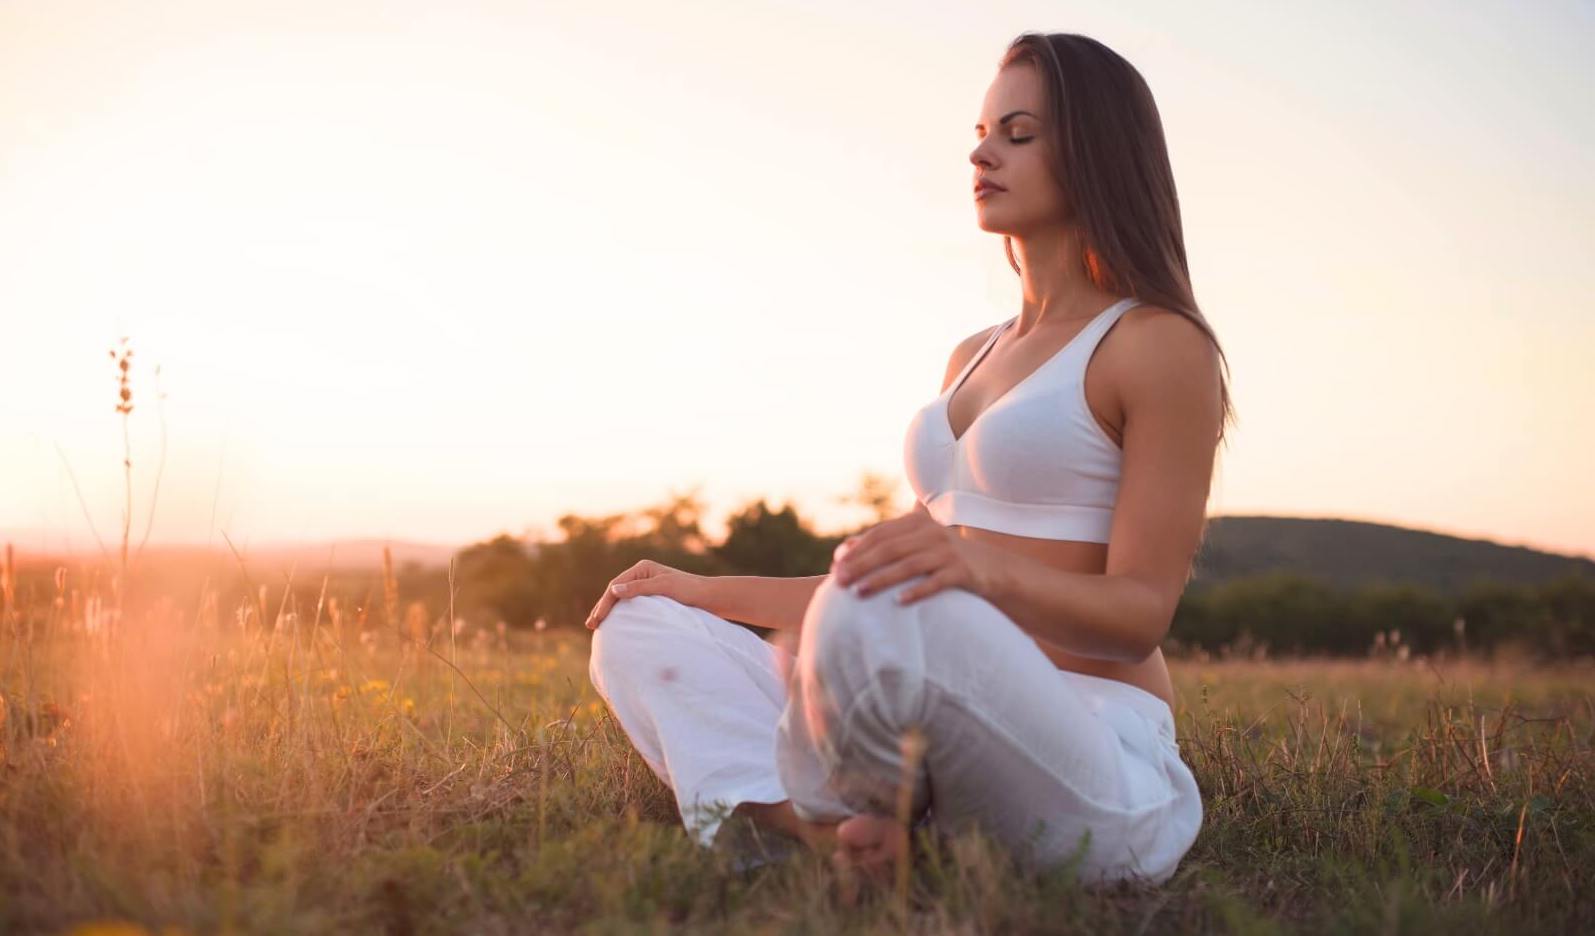 A woman with her legs crossed and eyes closed practicing mindfulness vs meditation in a meadow at sunset.